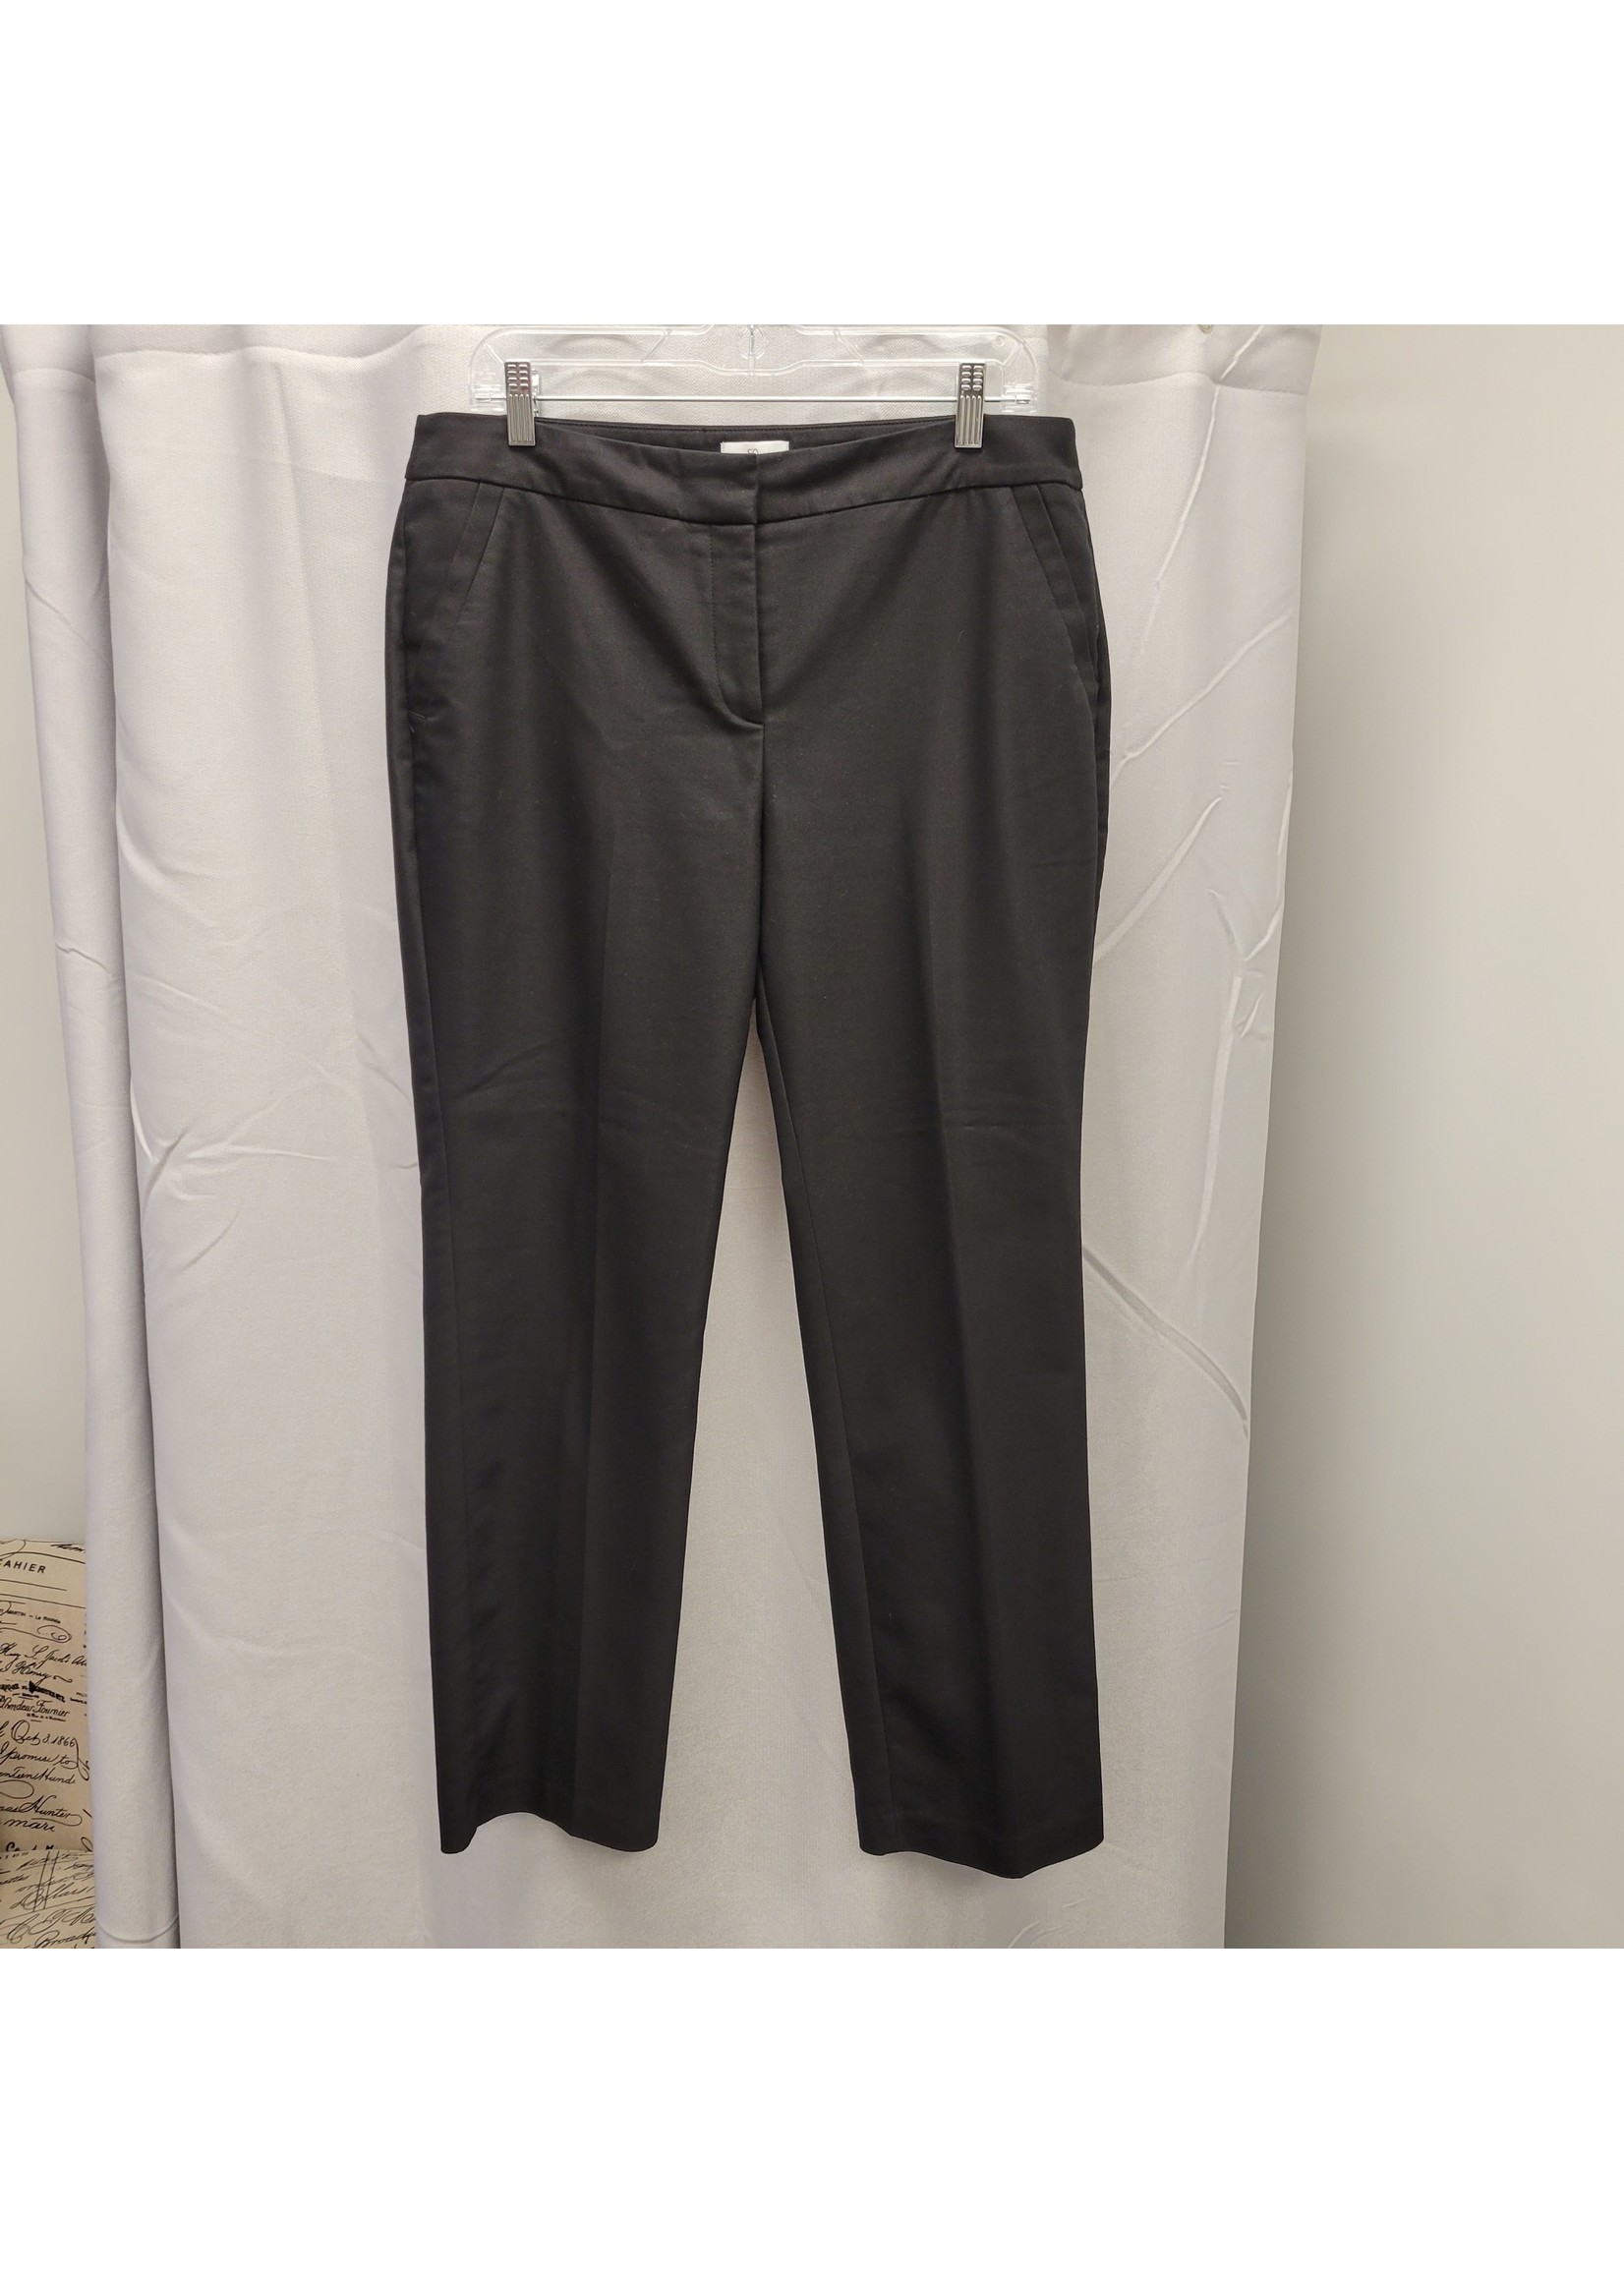 So Slimming Short Casual Pants (1.5) M/10 Pre-owned - Doubletake